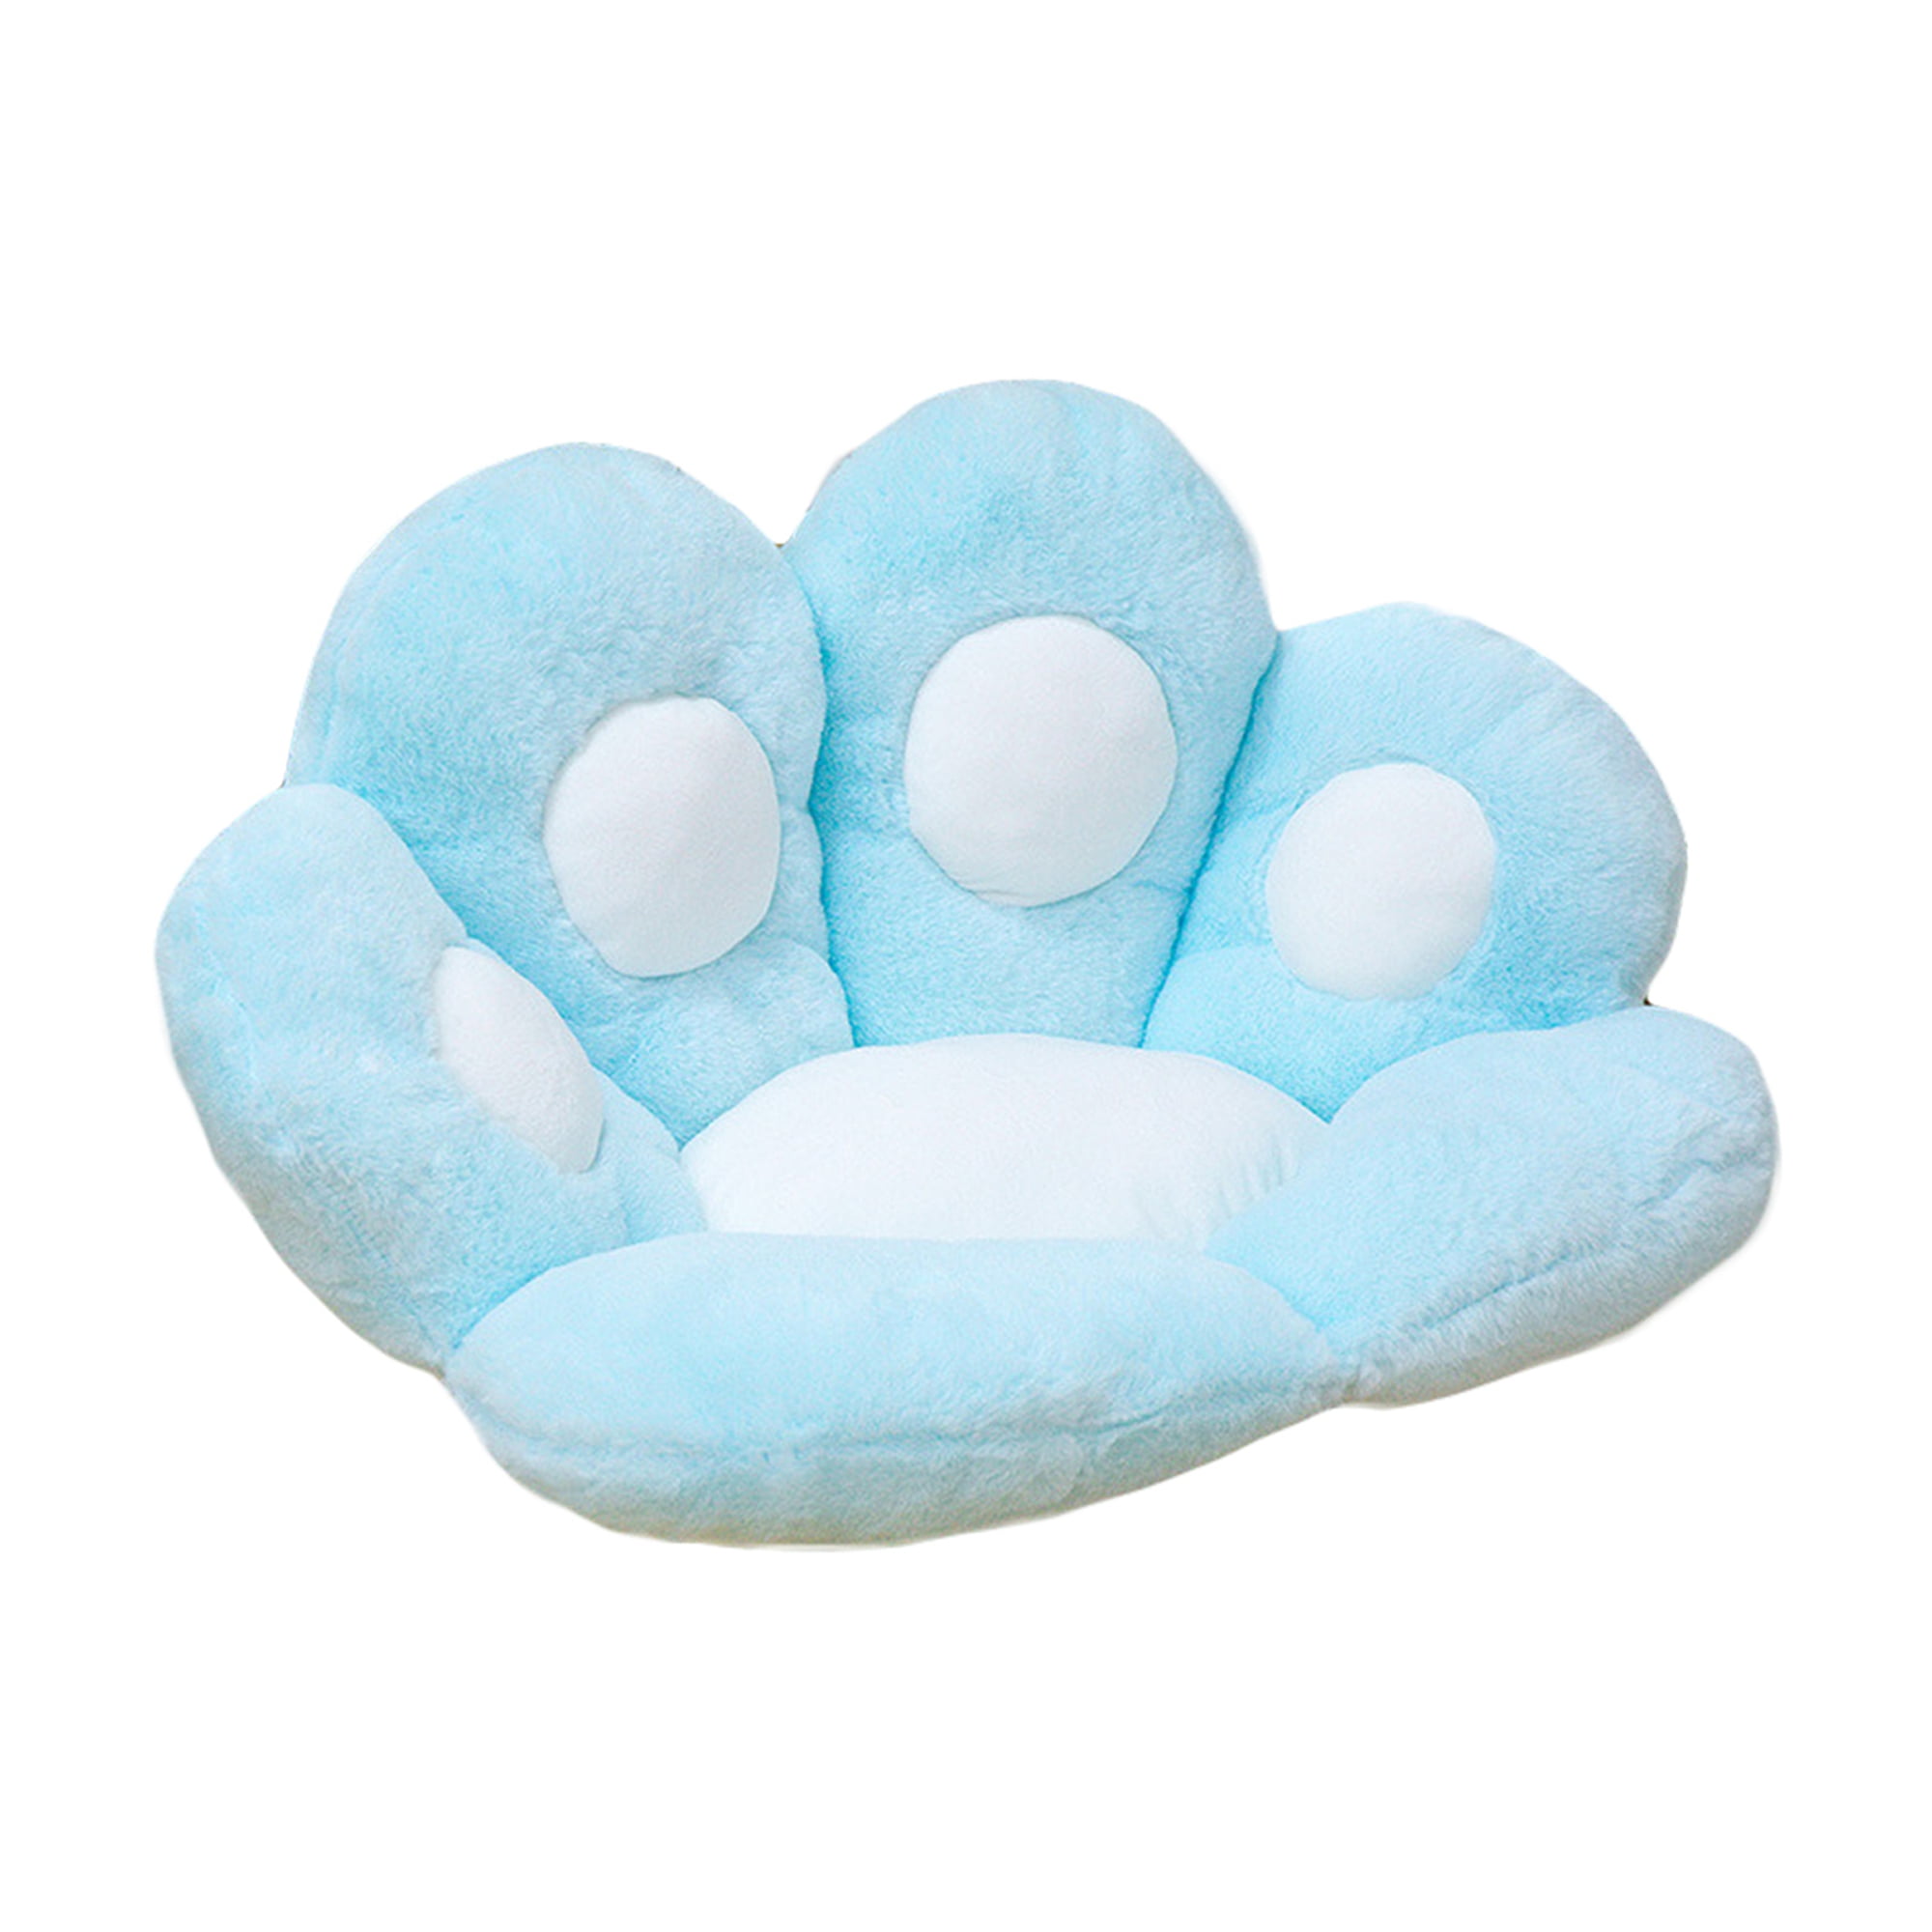  Deaboat Cat Paw Seat Cushion Chair Pads Cats Paw Shape